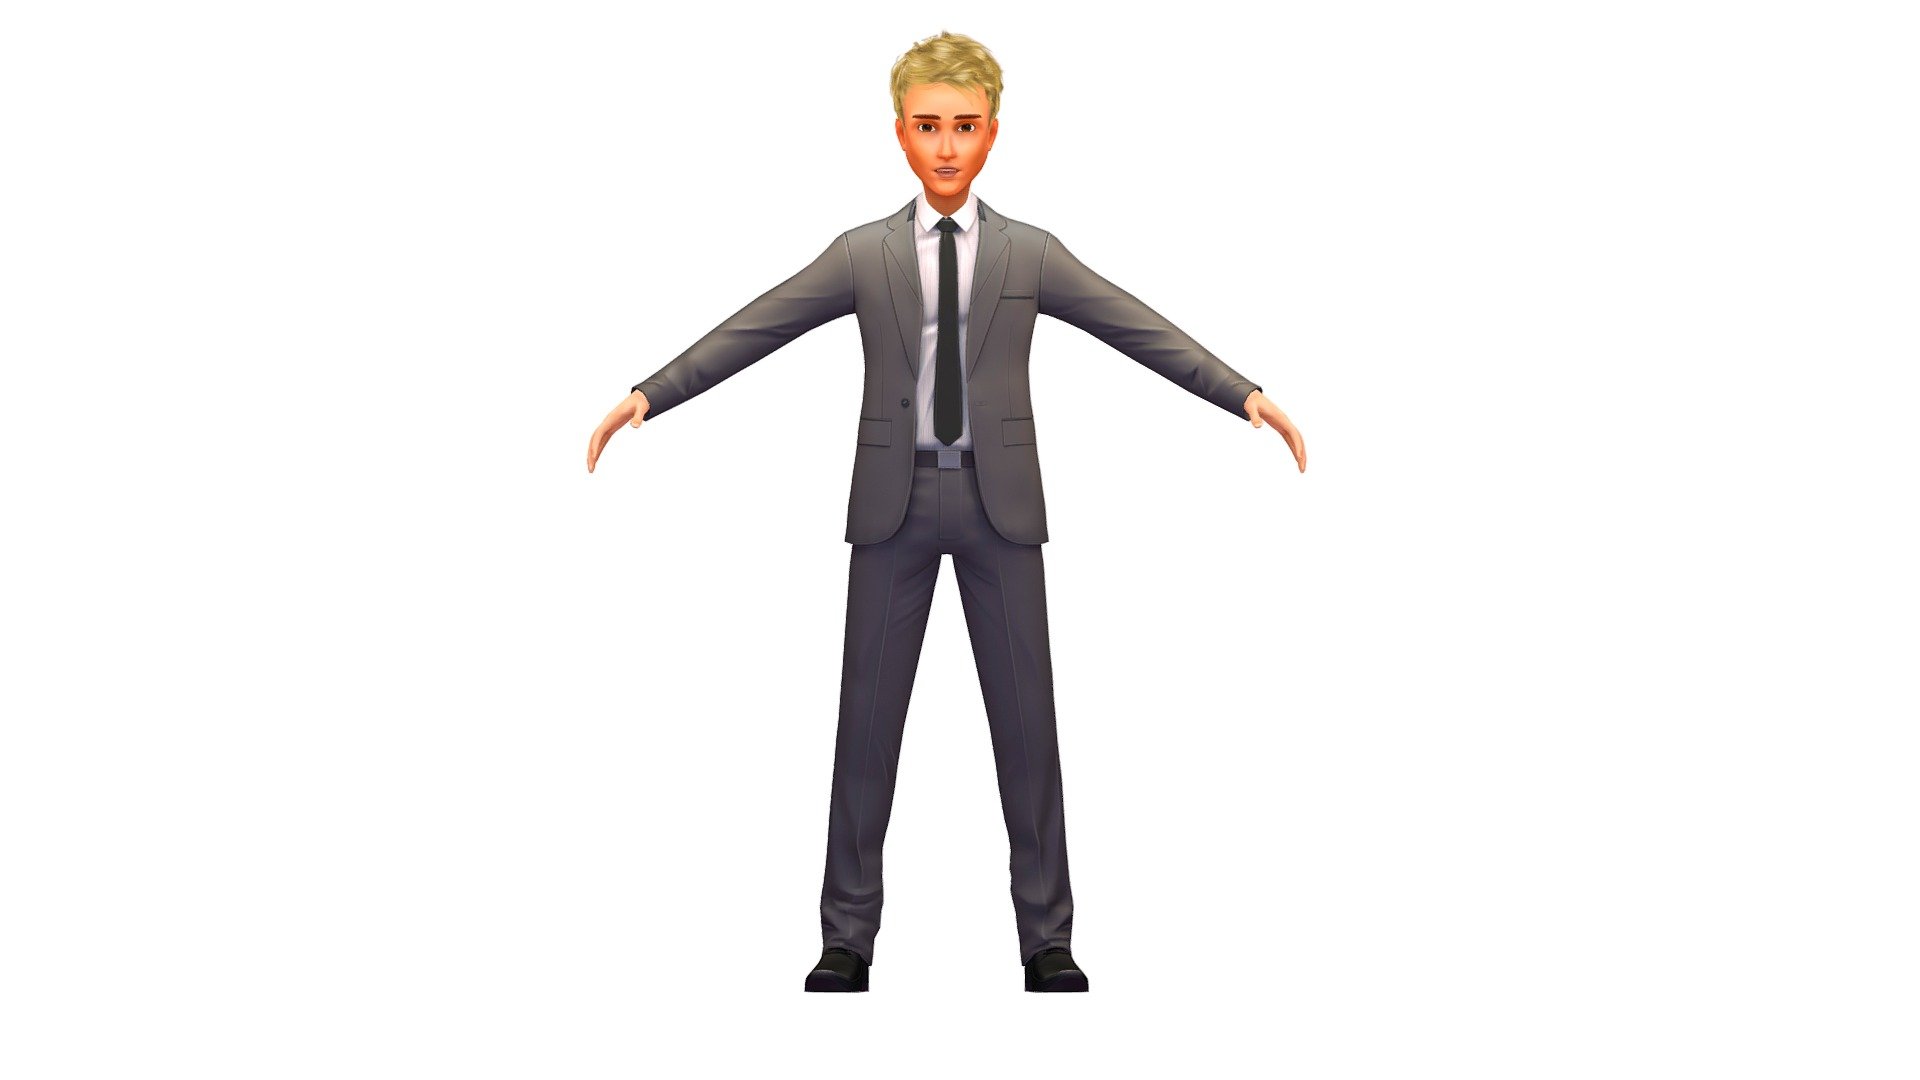 you can combine and match othercombinations using the collection:

hair collection - https://skfb.ly/ovqTn

clotch collection - https://skfb.ly/ovqT7

lowpoly avatar collection - https://skfb.ly/ovqTu - Cartoon Low Poly Style Avatar 009 - Buy Royalty Free 3D model by Oleg Shuldiakov (@olegshuldiakov) 3d model